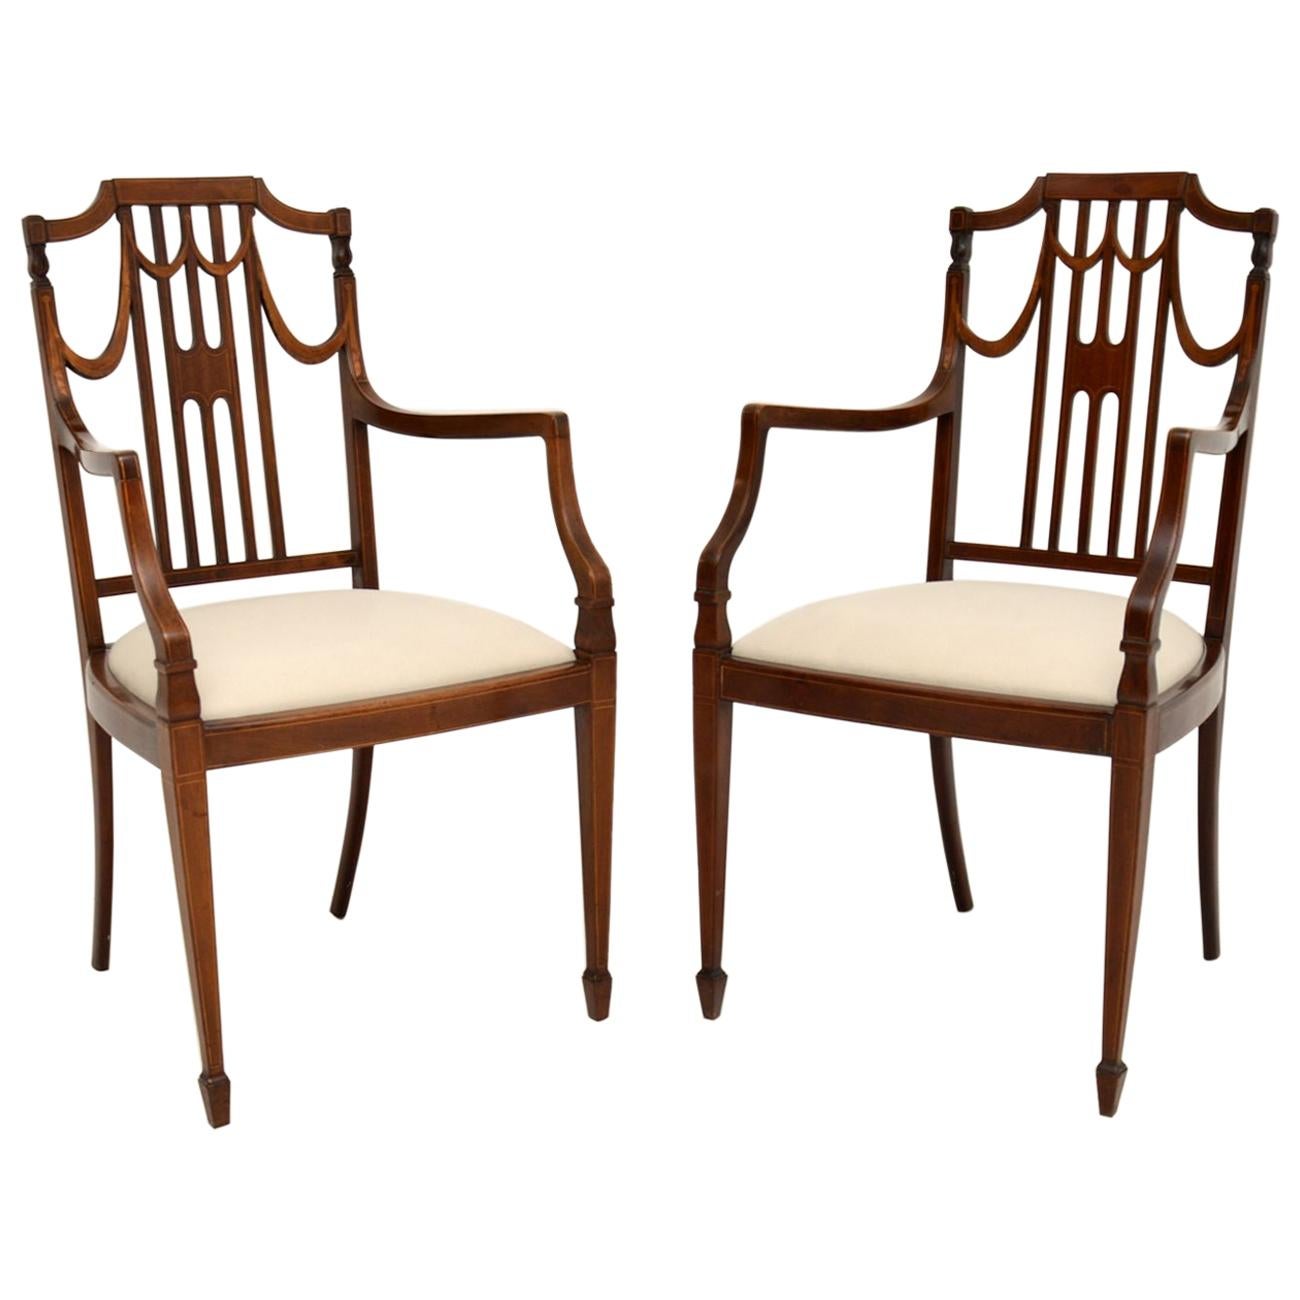 Pair of Antique Edwardian Inlaid Mahogany Armchairs